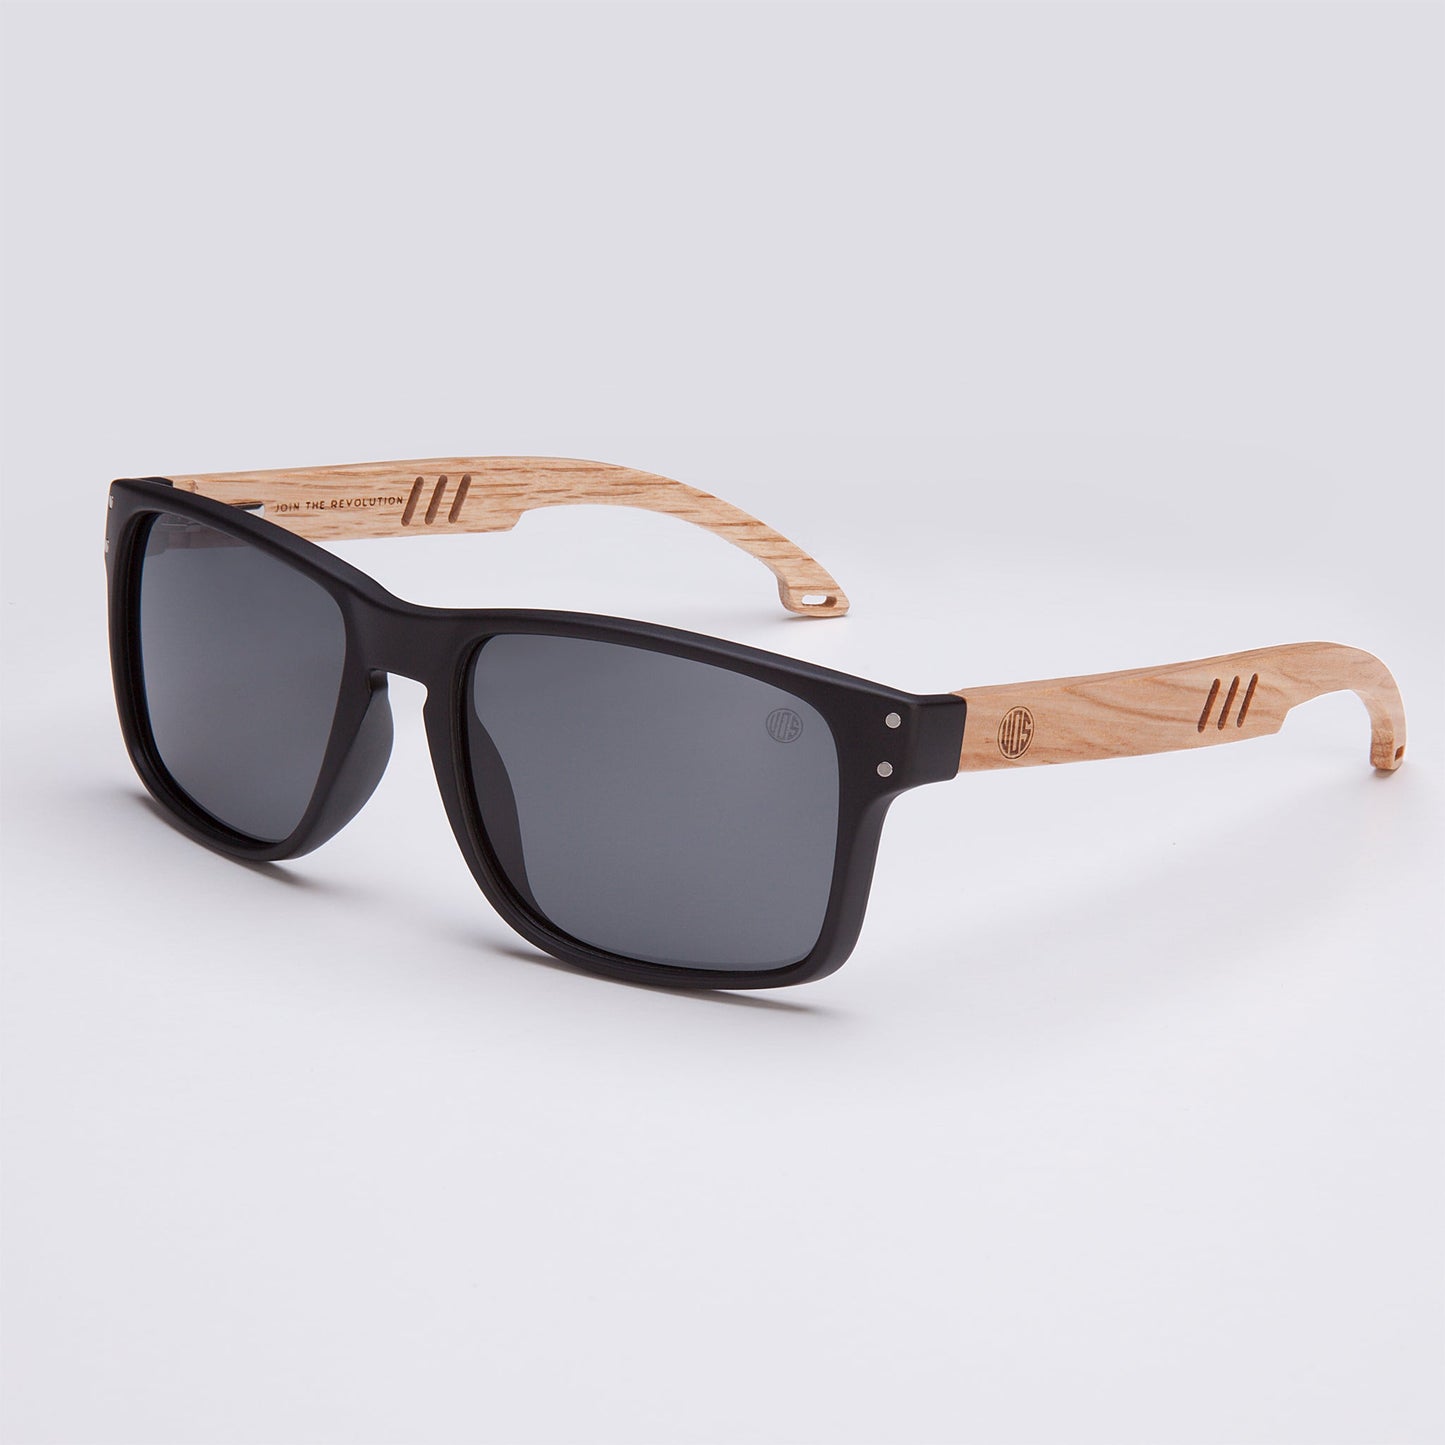 Eco Friendly SunglassesBells Black LensBells are a classic polarised lens designed with a matt black frame and beach wood arms. Available in 4 different colour lens options, you can enjoy protection, glar